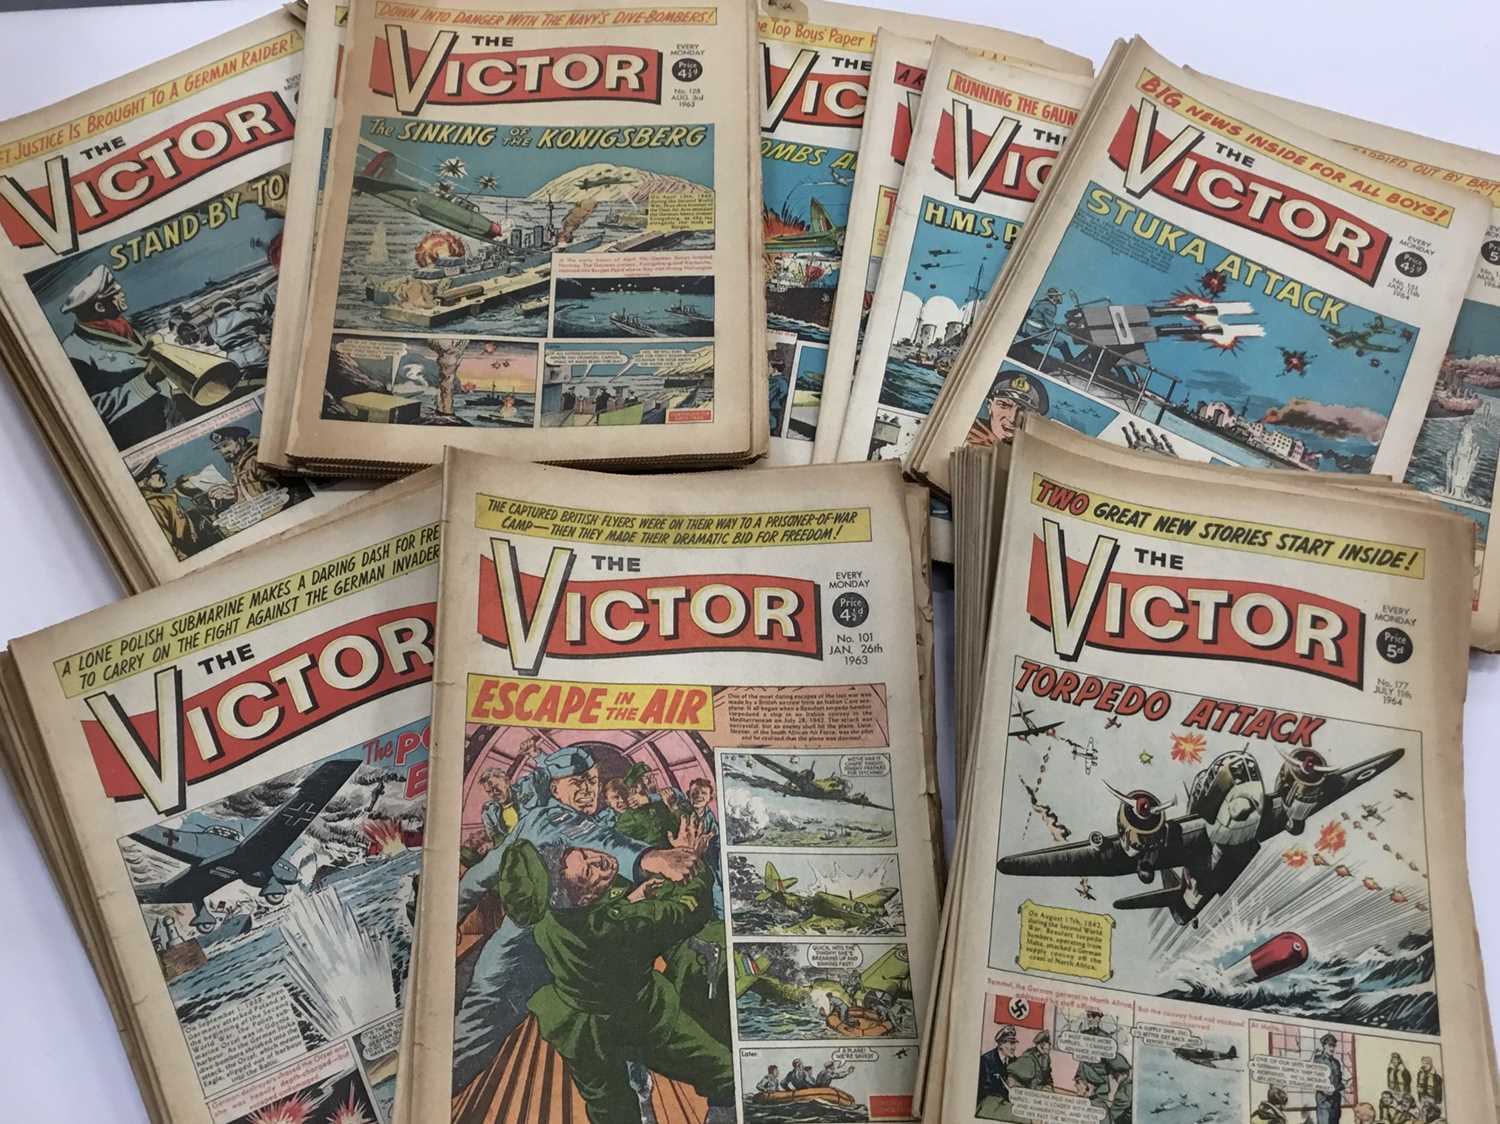 Over 300 issues of The Victor comic, from issue 1 1961 to 383 in 1968, together with other 1960s com